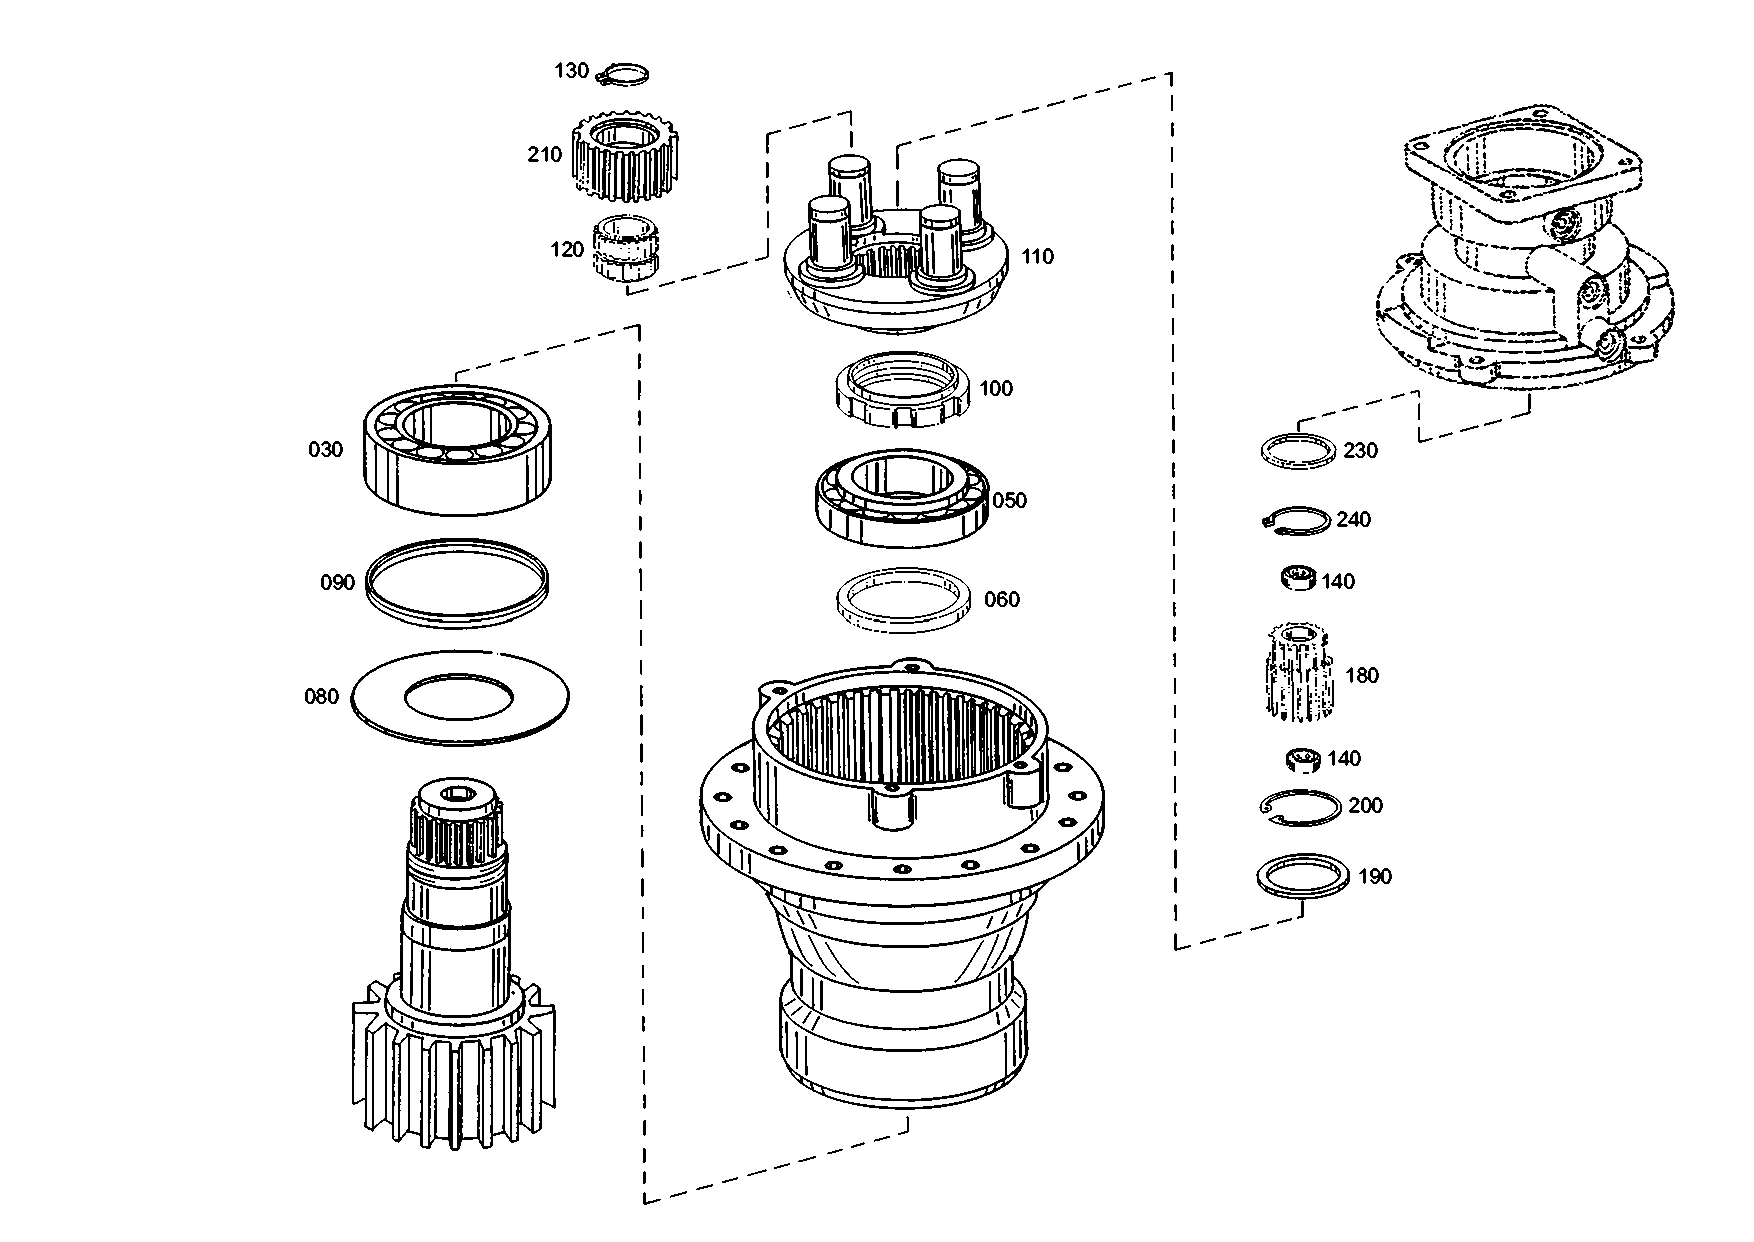 drawing for FUCHS-BAGGER GMBH + CO.KG 5904658879 - PLANETARY GEAR (figure 1)